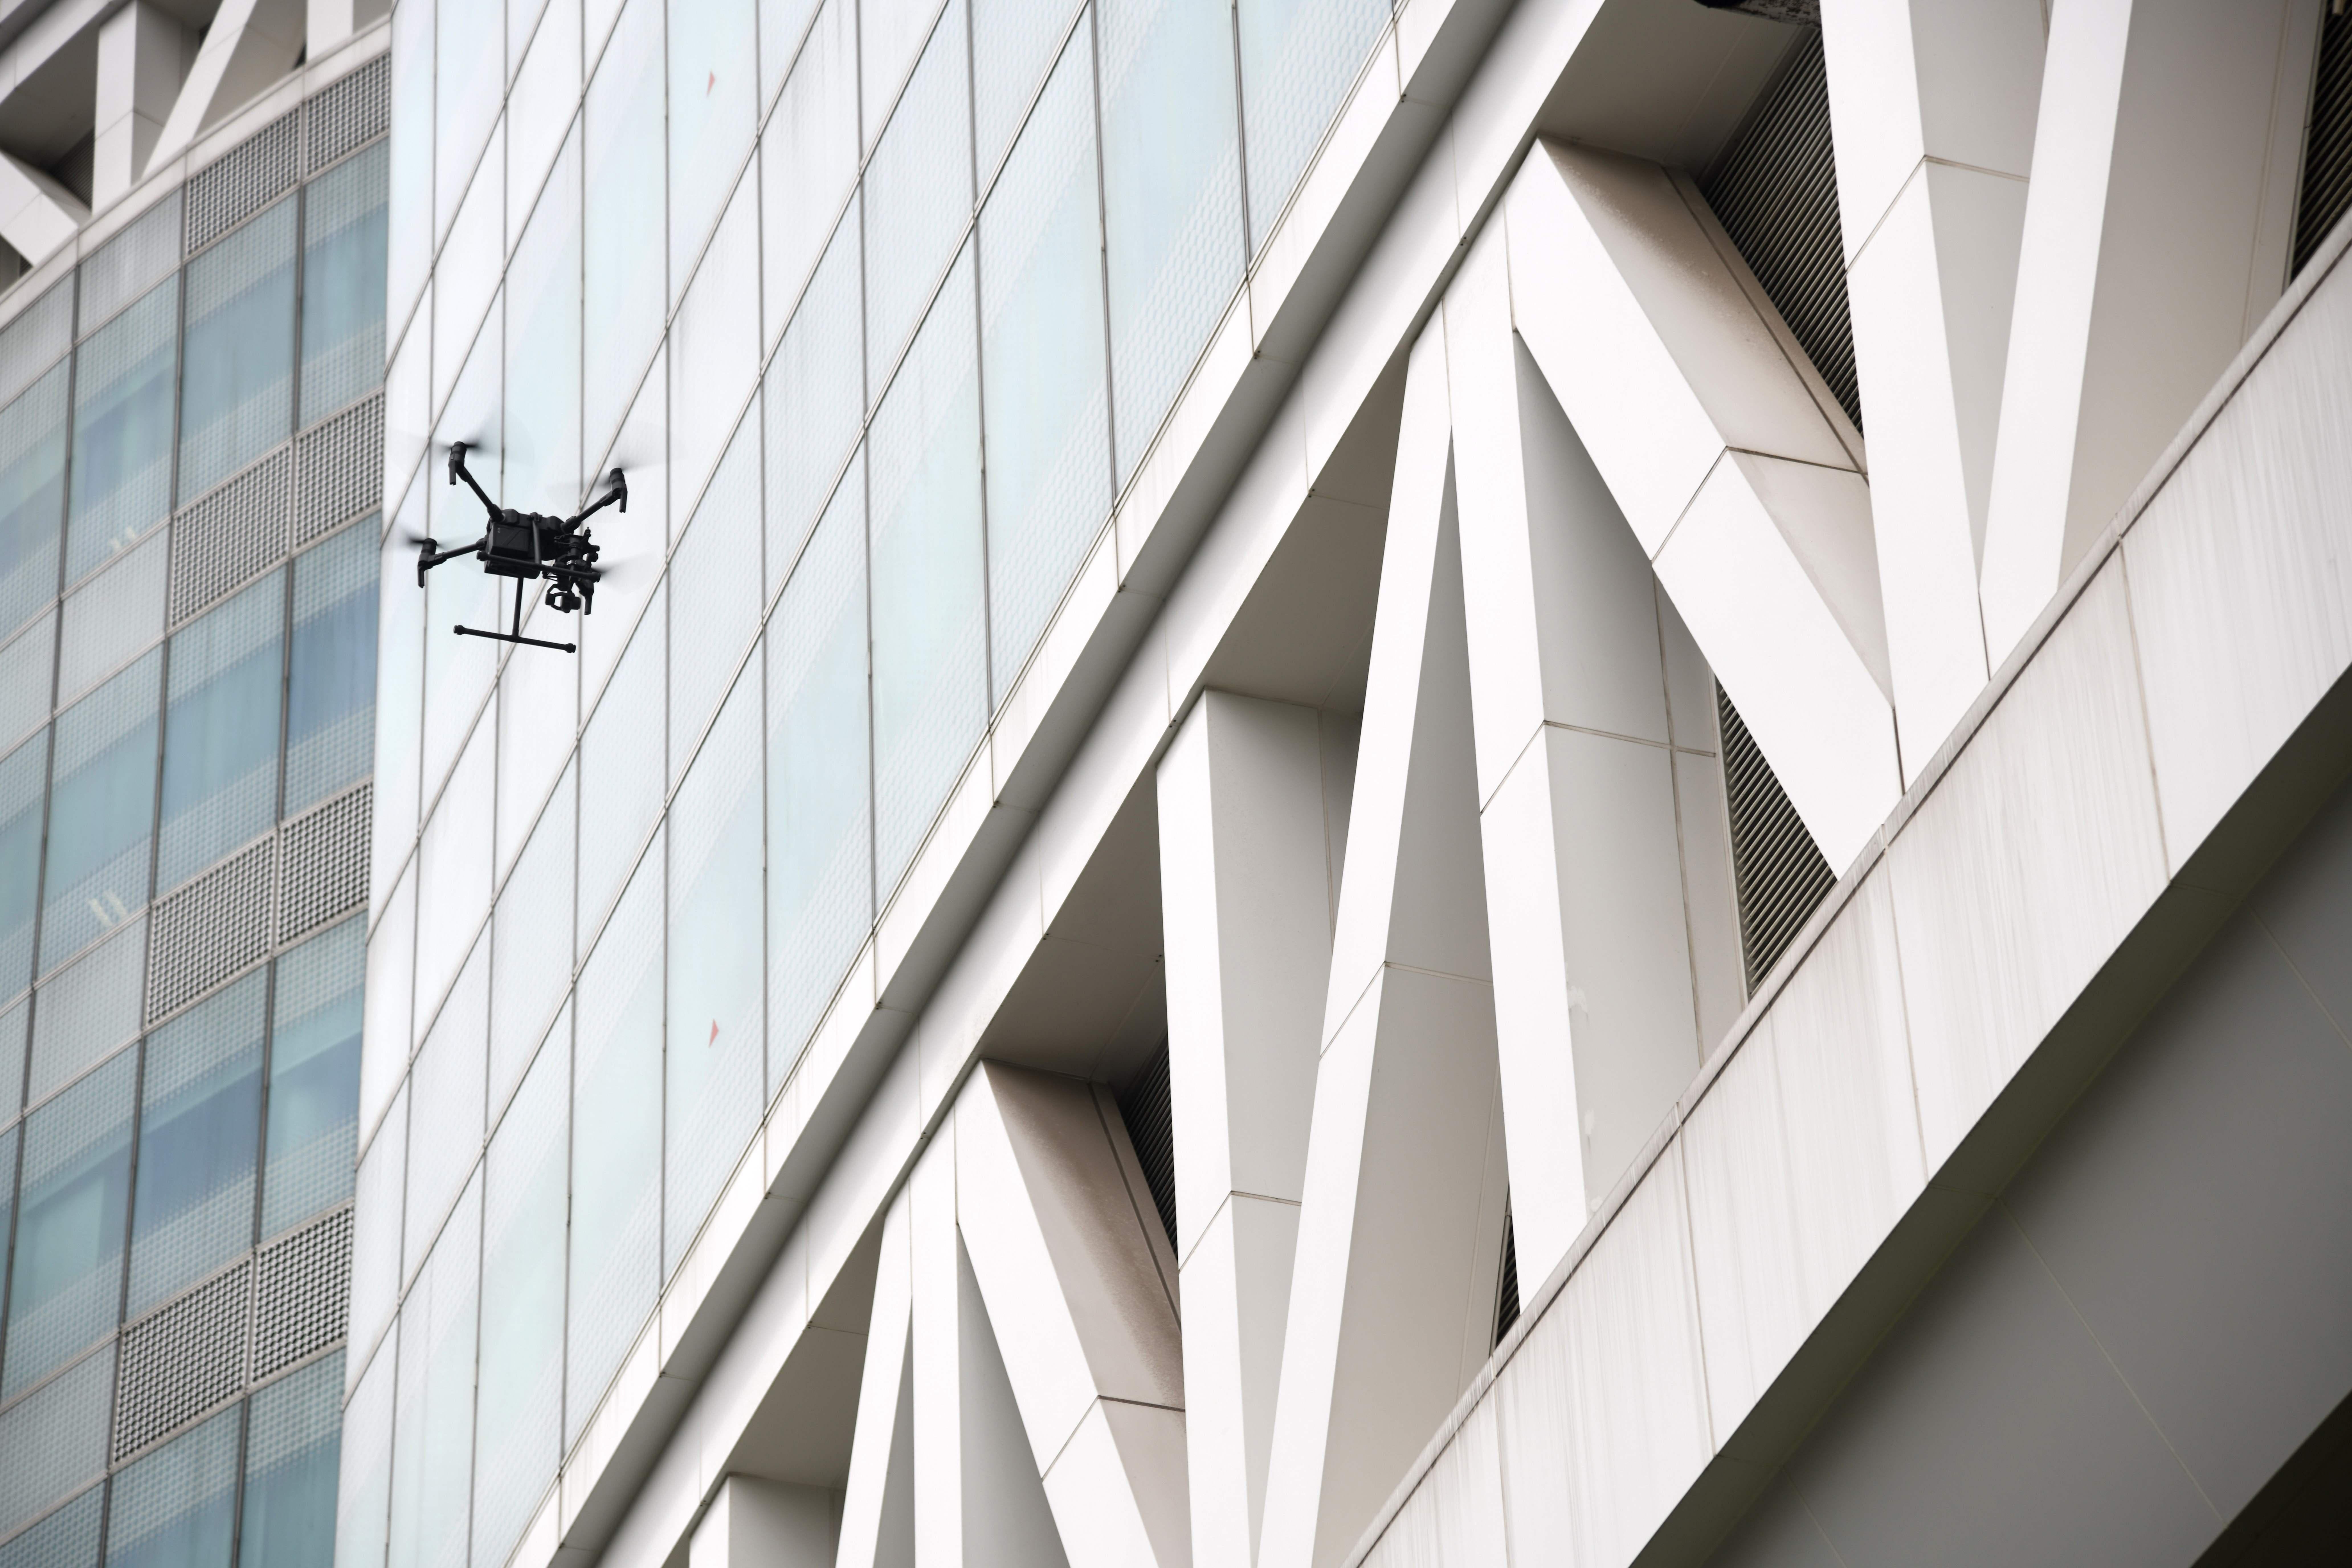 A small drone flies in front of windows on a large building.